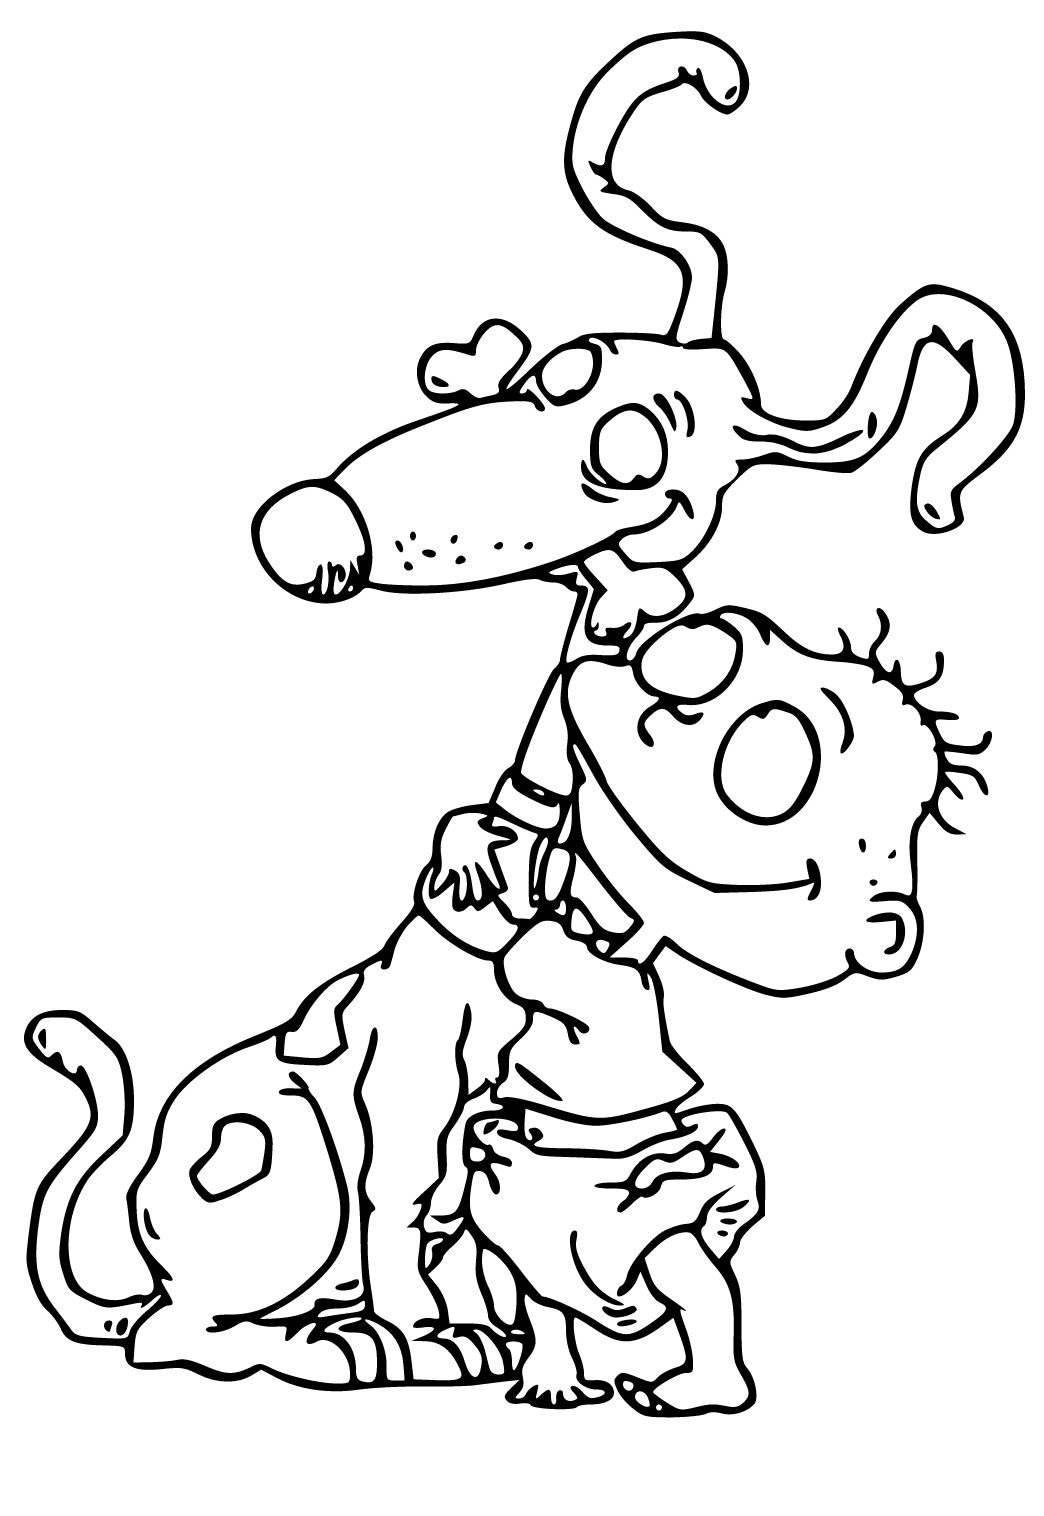 Free printable rugrats embrace coloring page for adults and kids